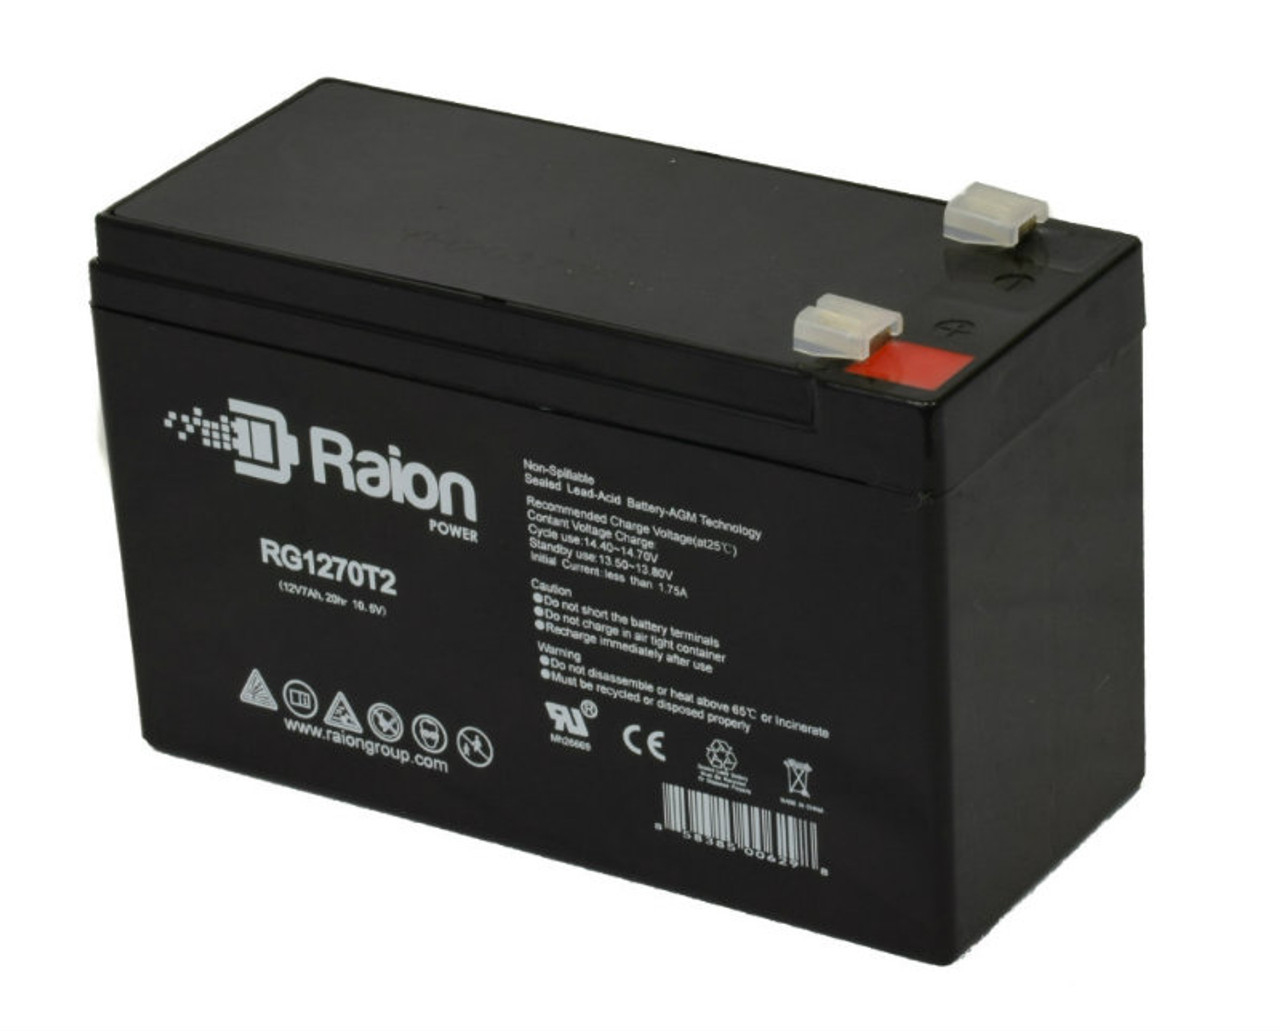 Raion Power RG1270T1 12V 7Ah Non-Spillable Replacement Battery for Power Rite PRB127